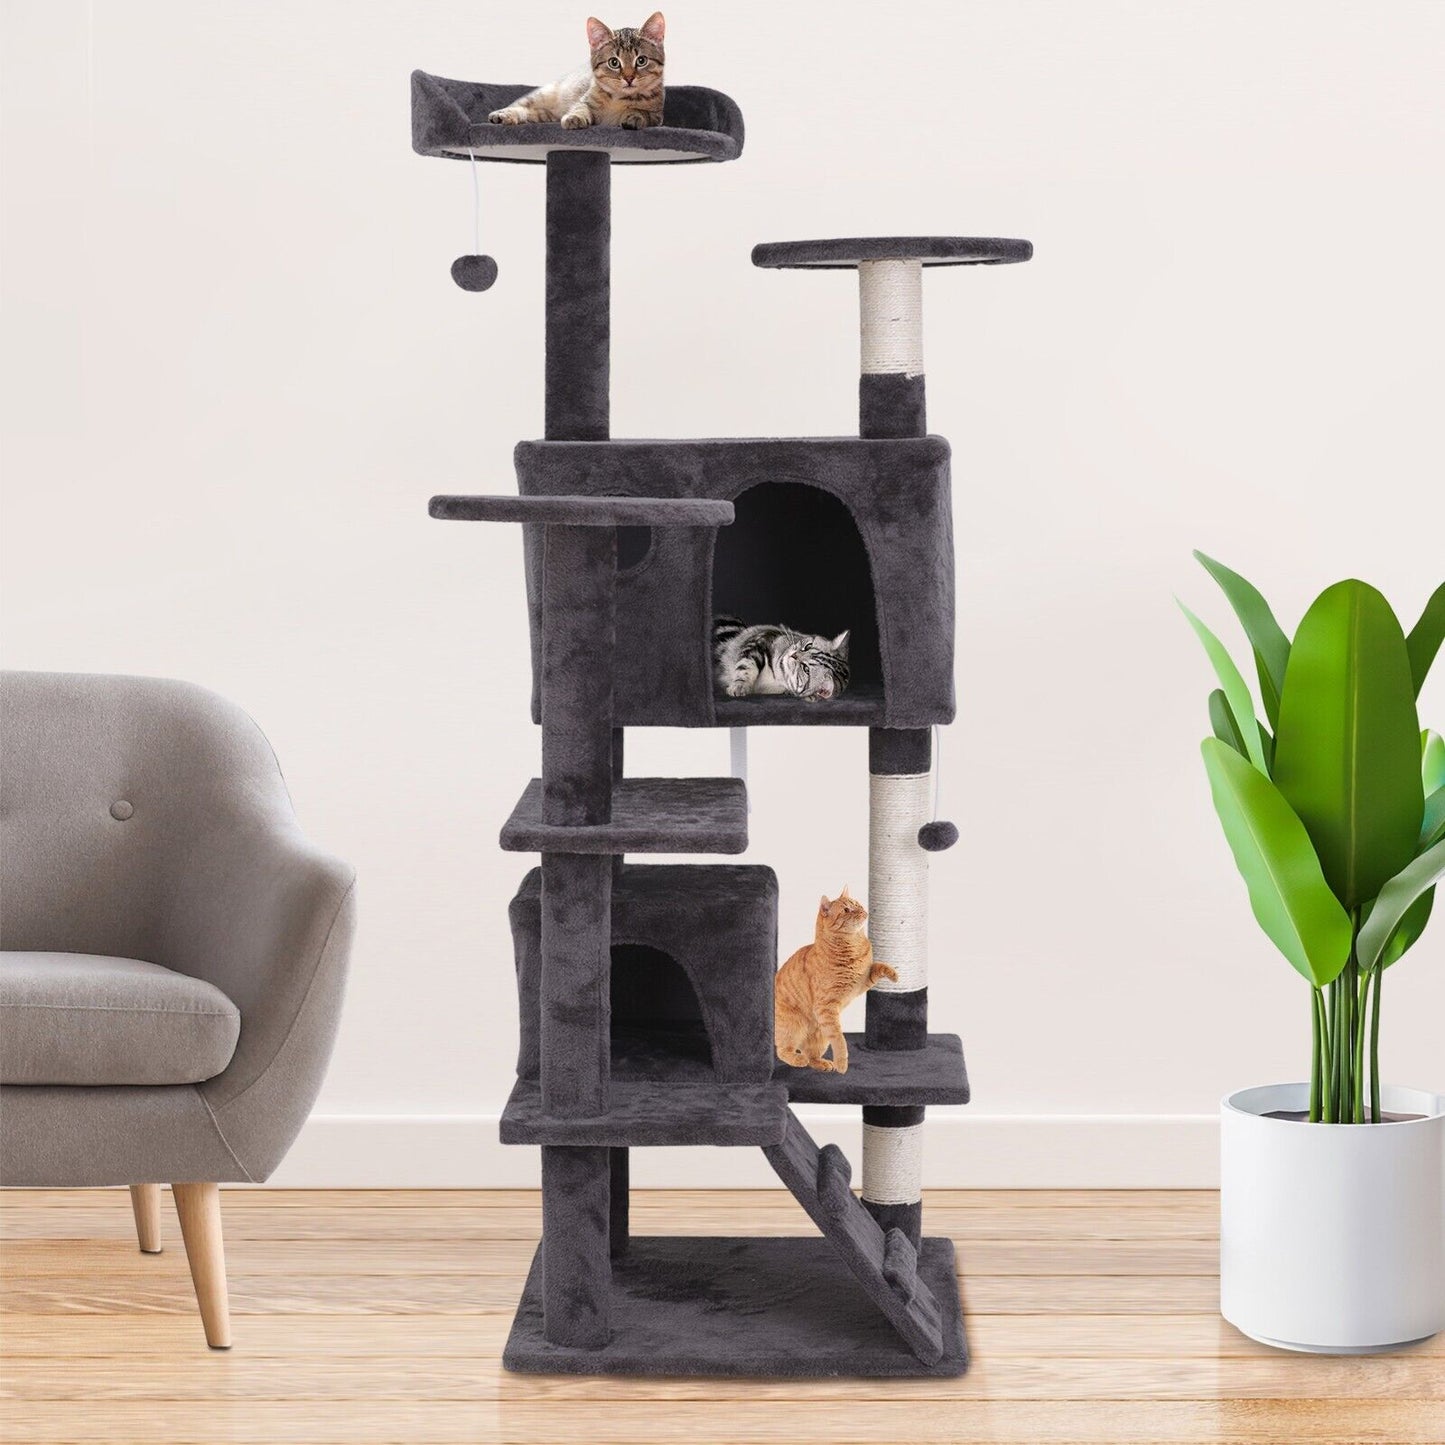 55" Dark Grey Cat Tree Tower Condo Scrathcher Post Activity Center Playing House